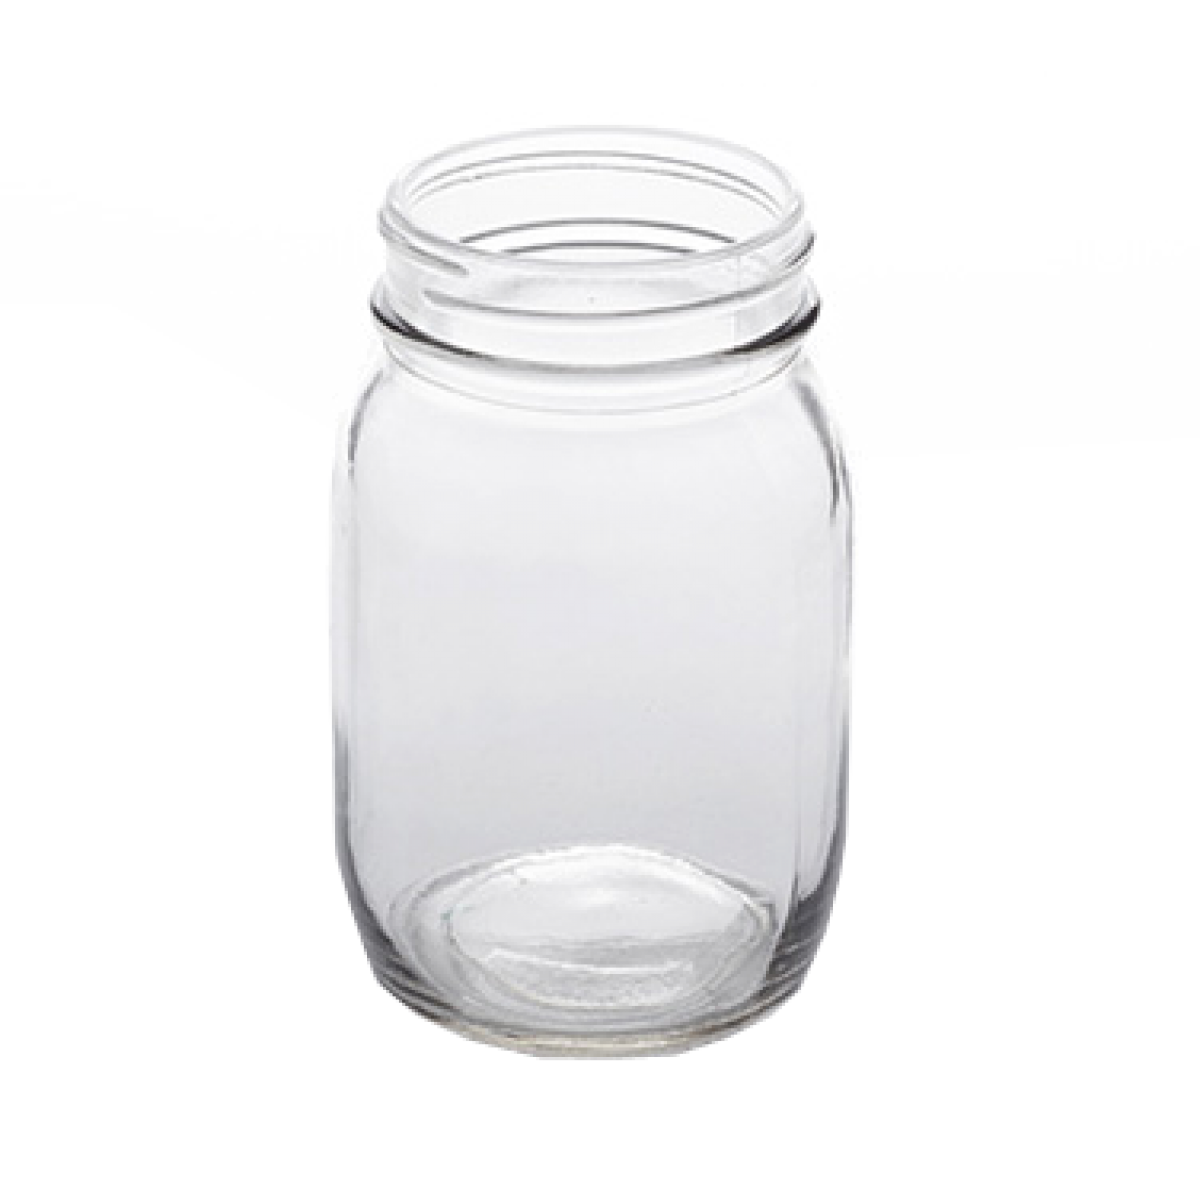 Jar Container Image Free Download PNG HQ PNG Image